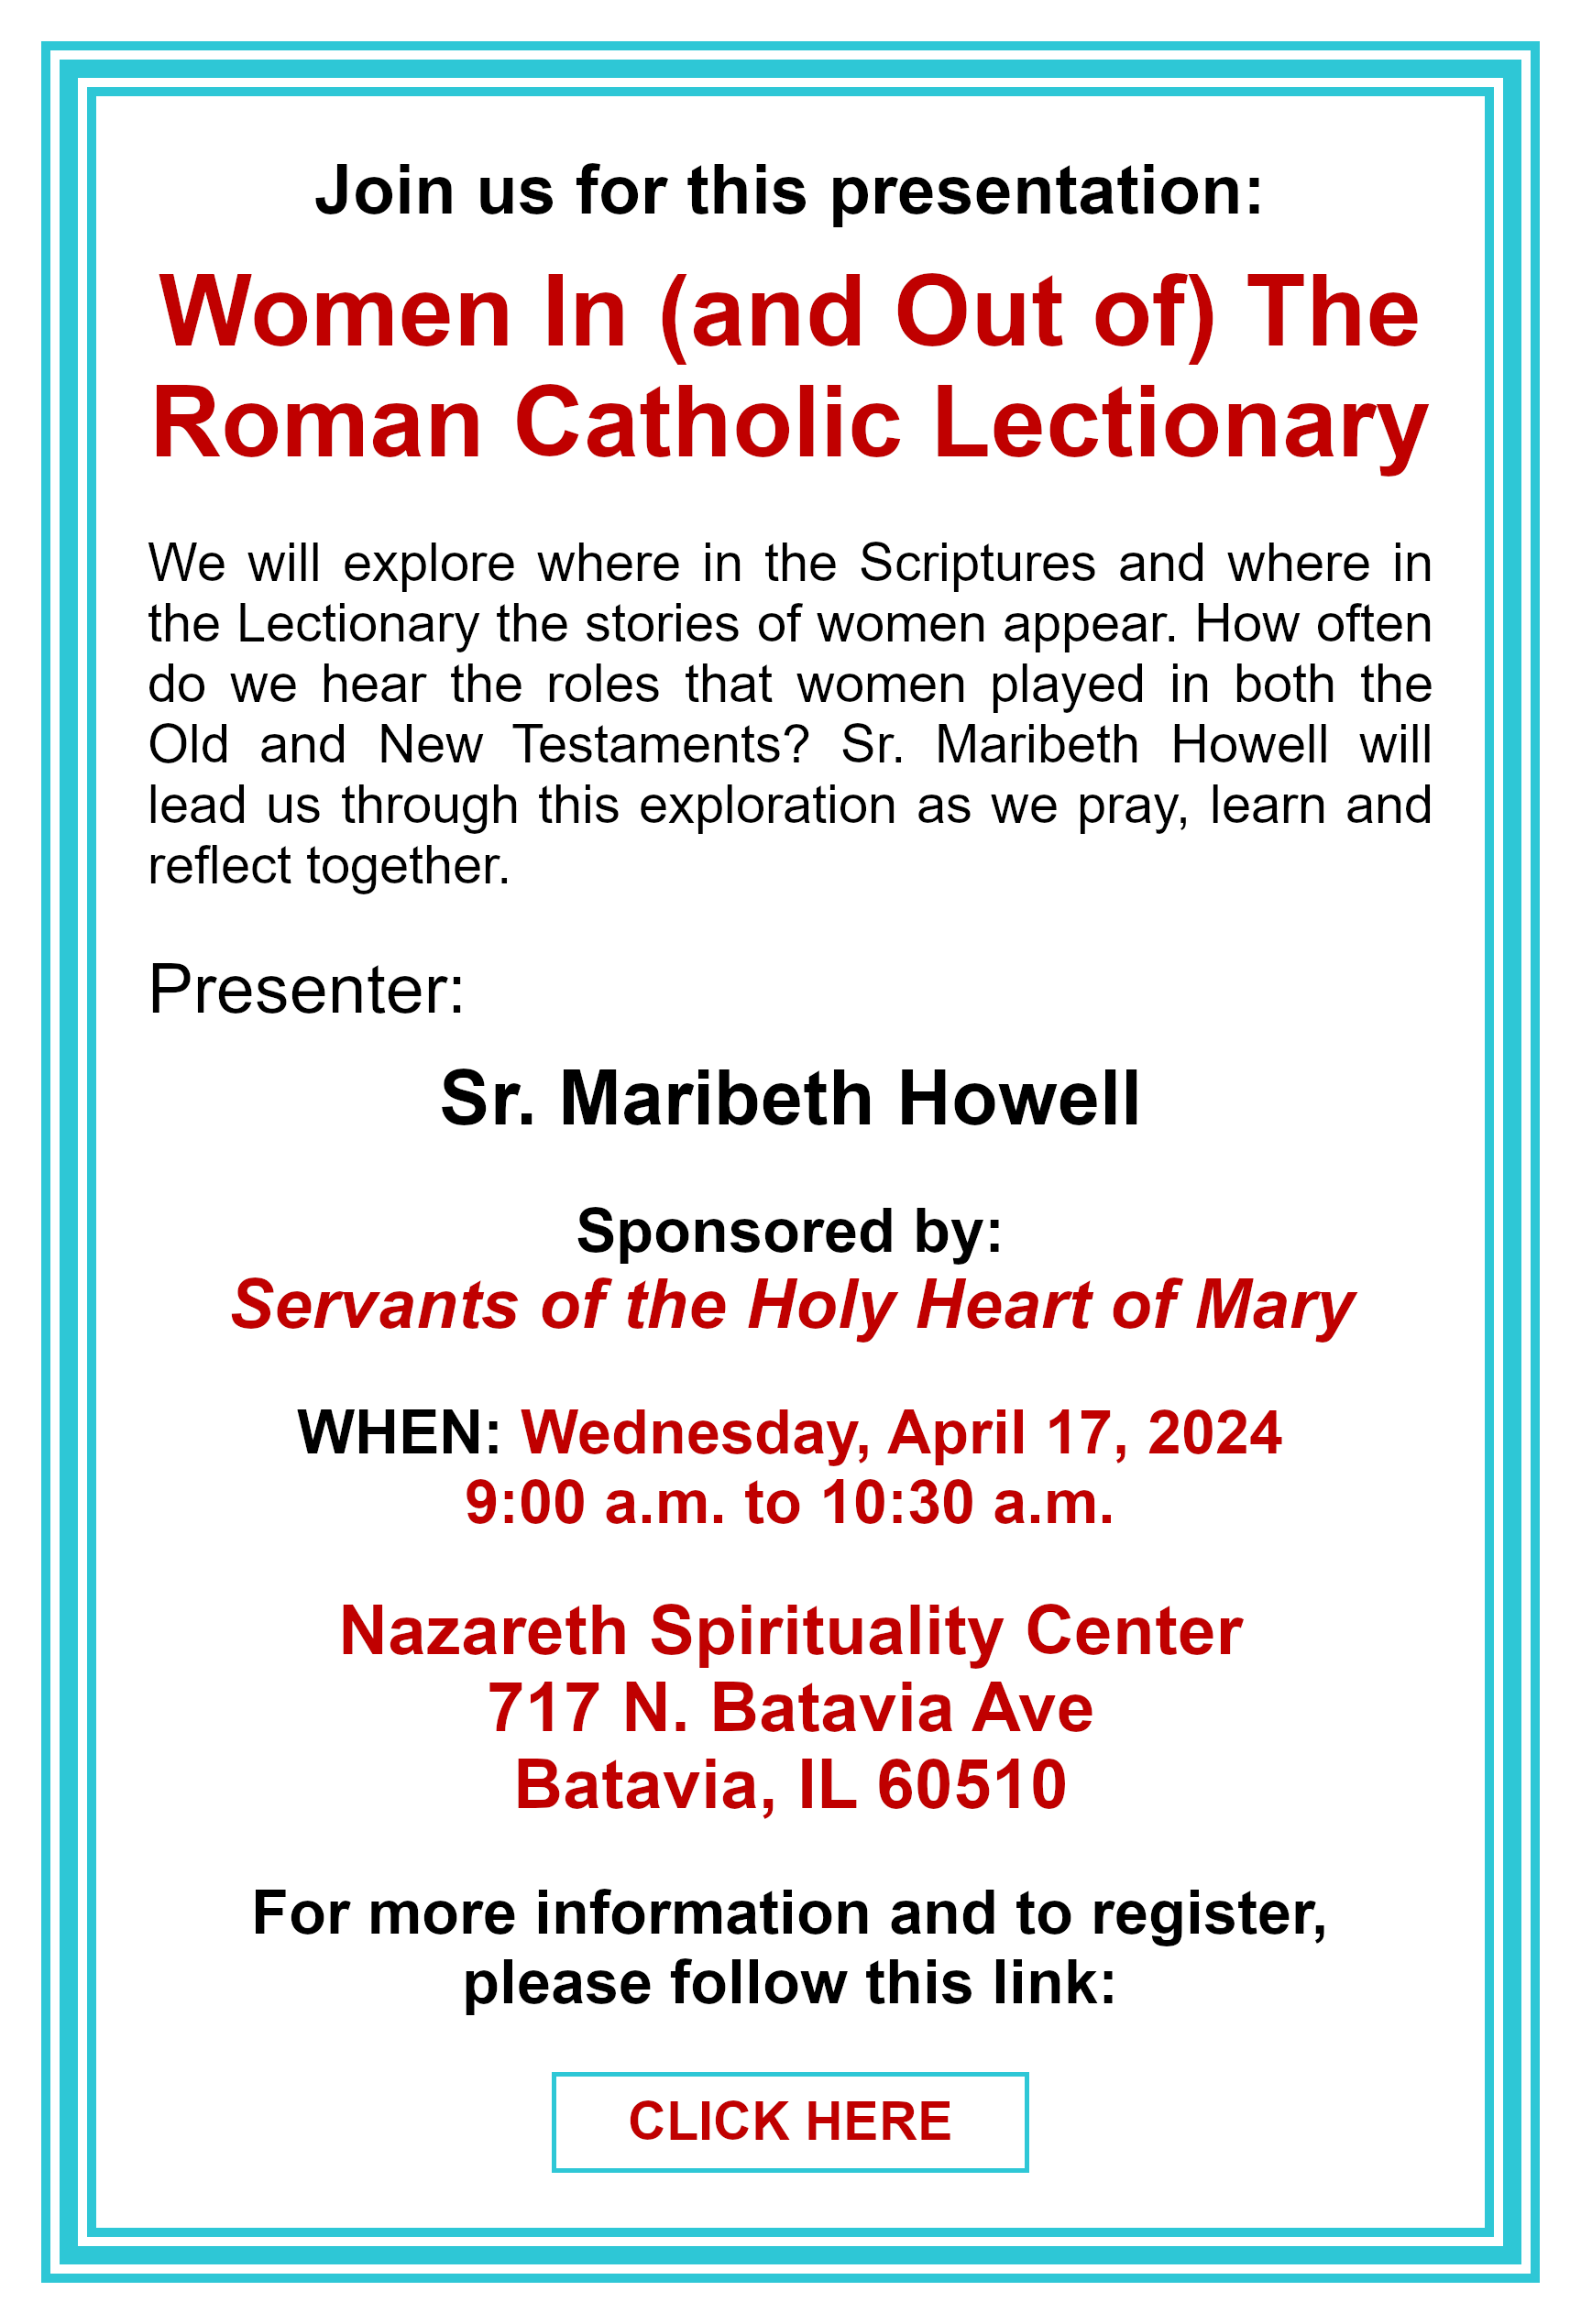 Women In (and Out of) the Roman Catholic Lectionary: Click here for more information